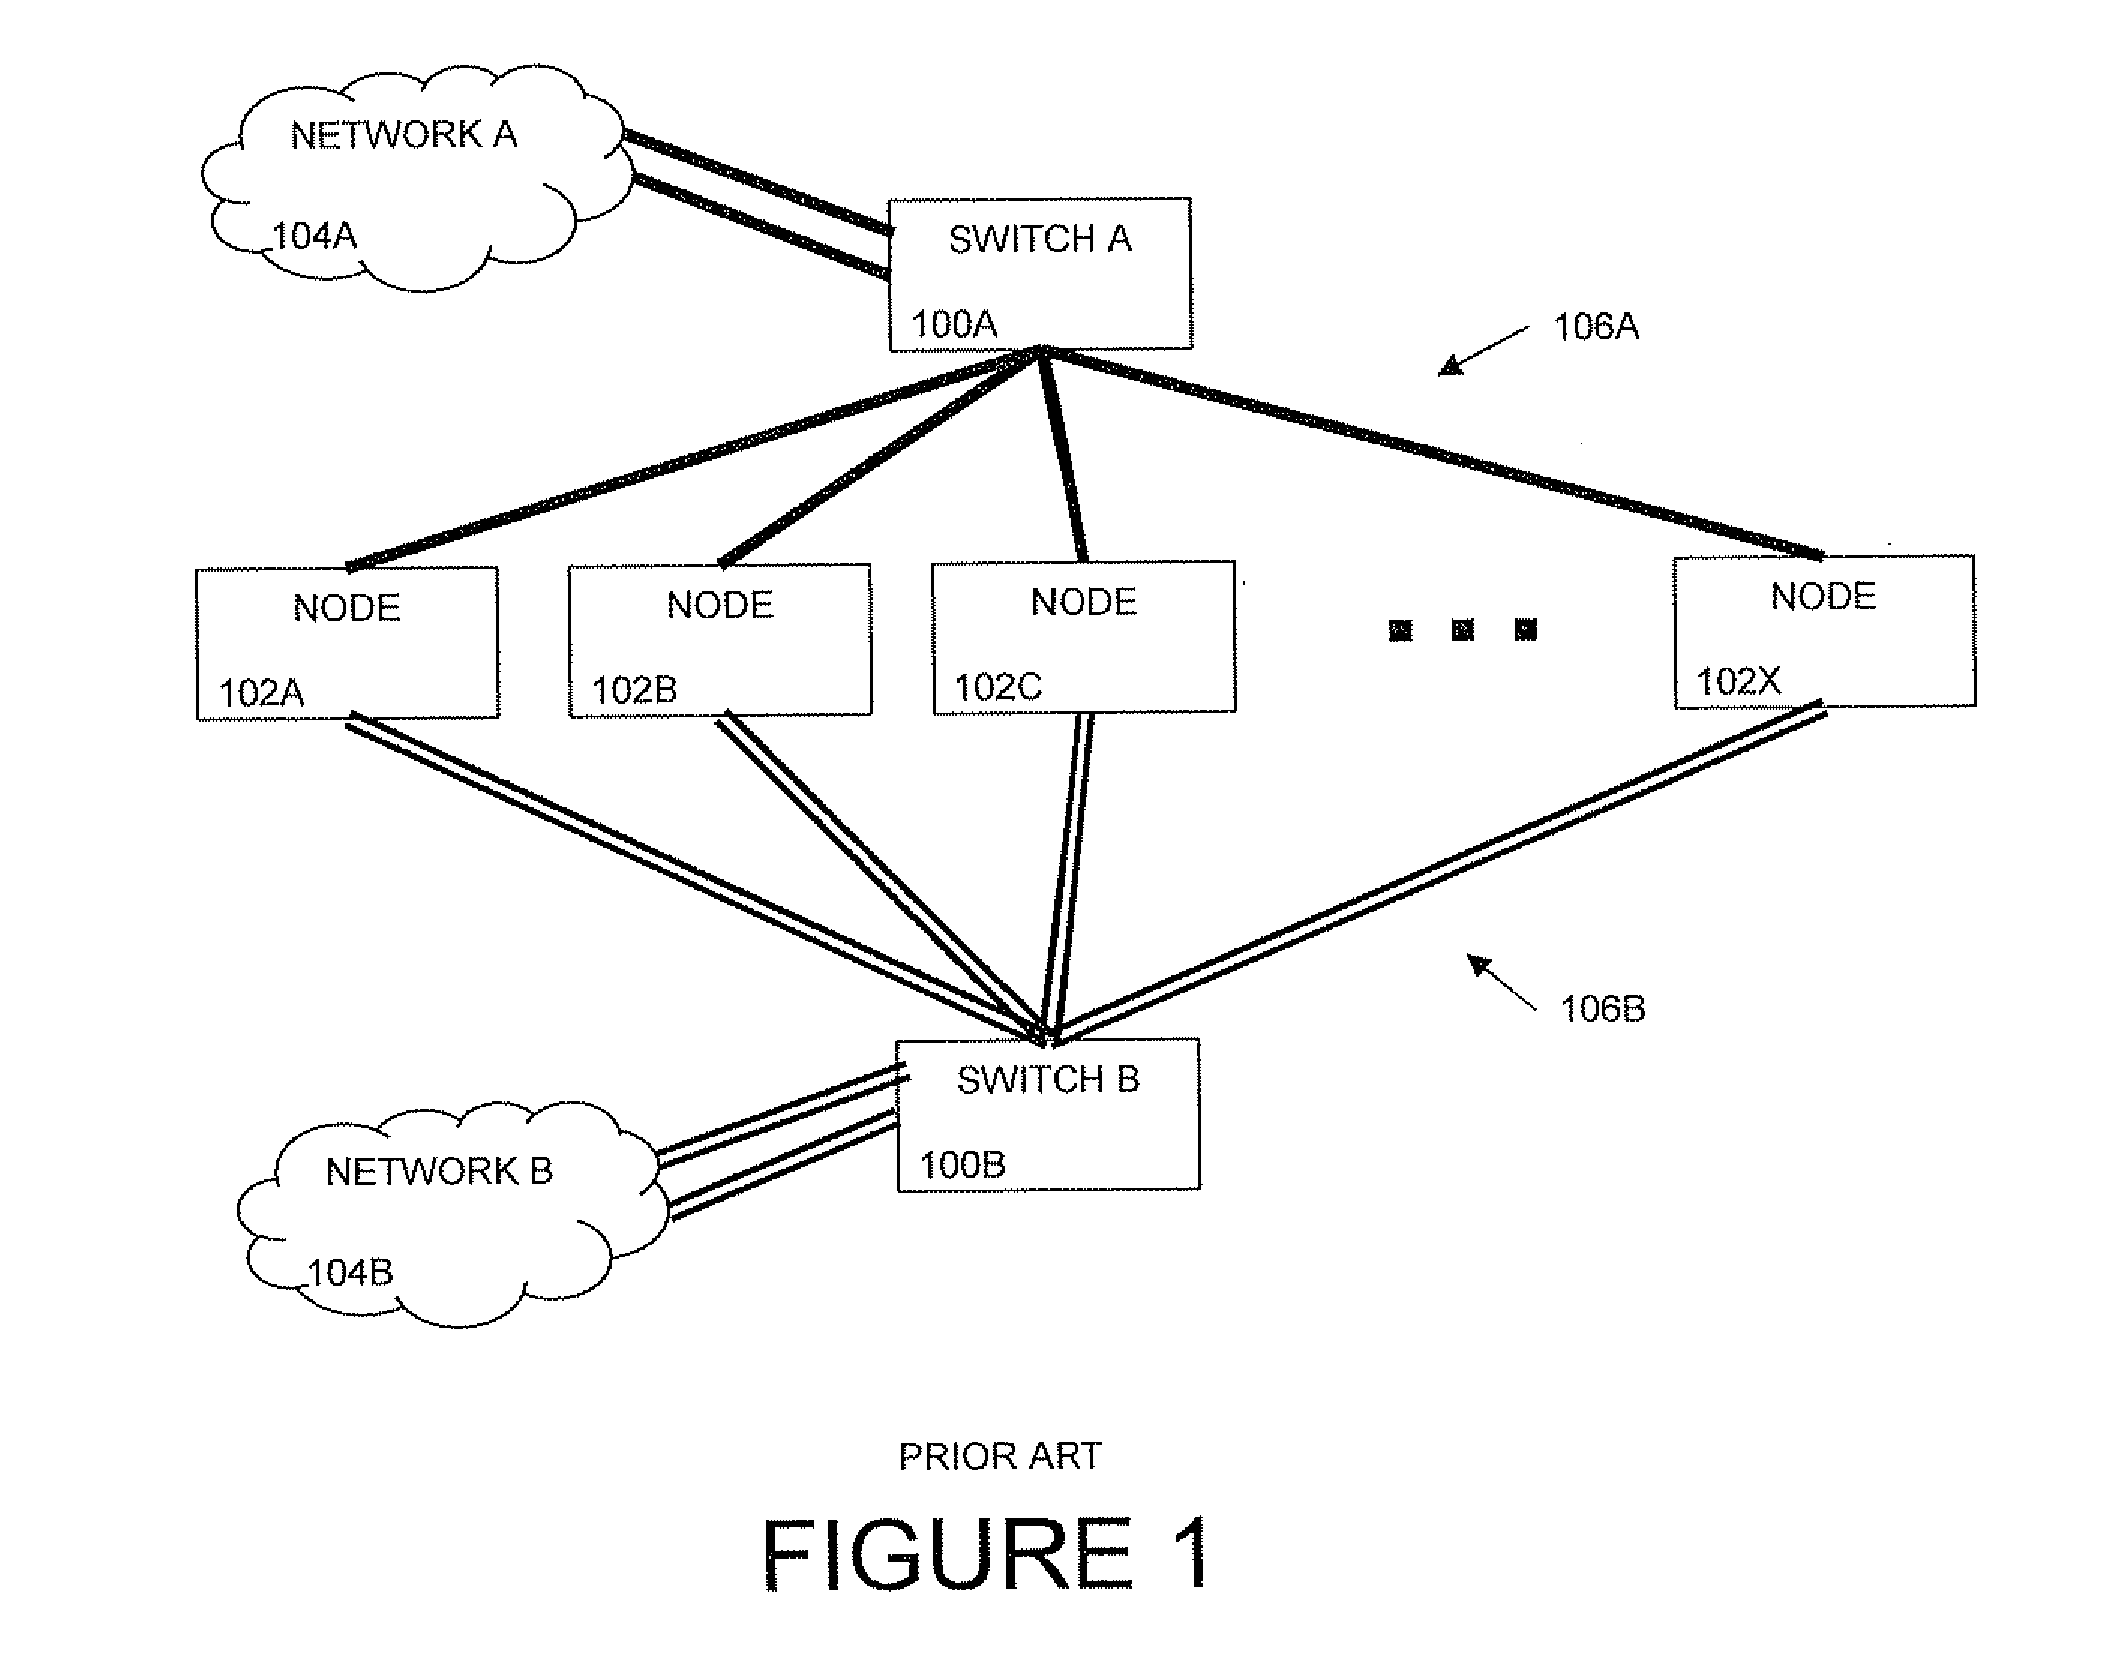 Static Ring Network for Vehicle Communications